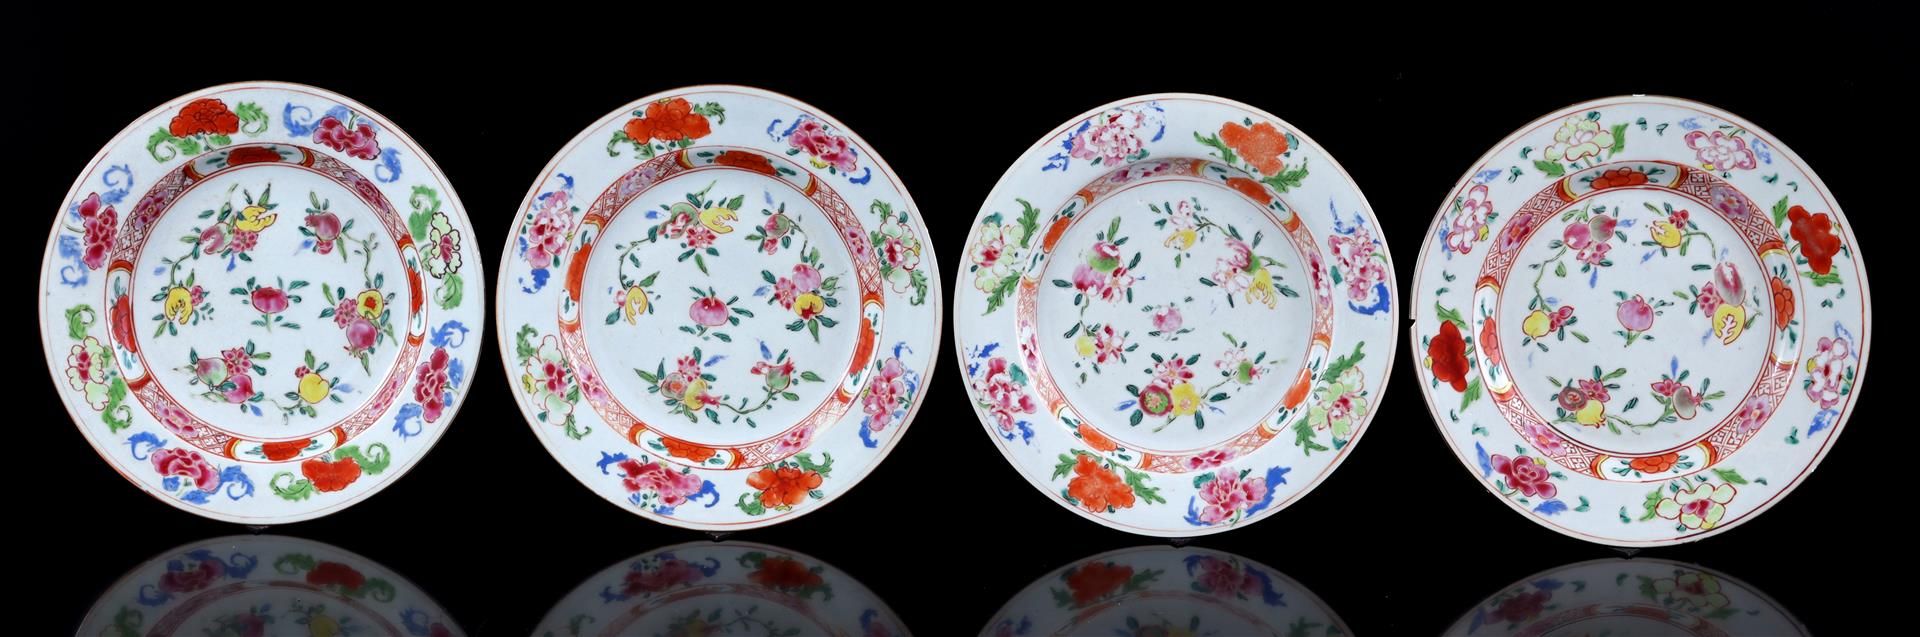 4 Famille Rose porcelain dishes with polychrome decor of peaches 